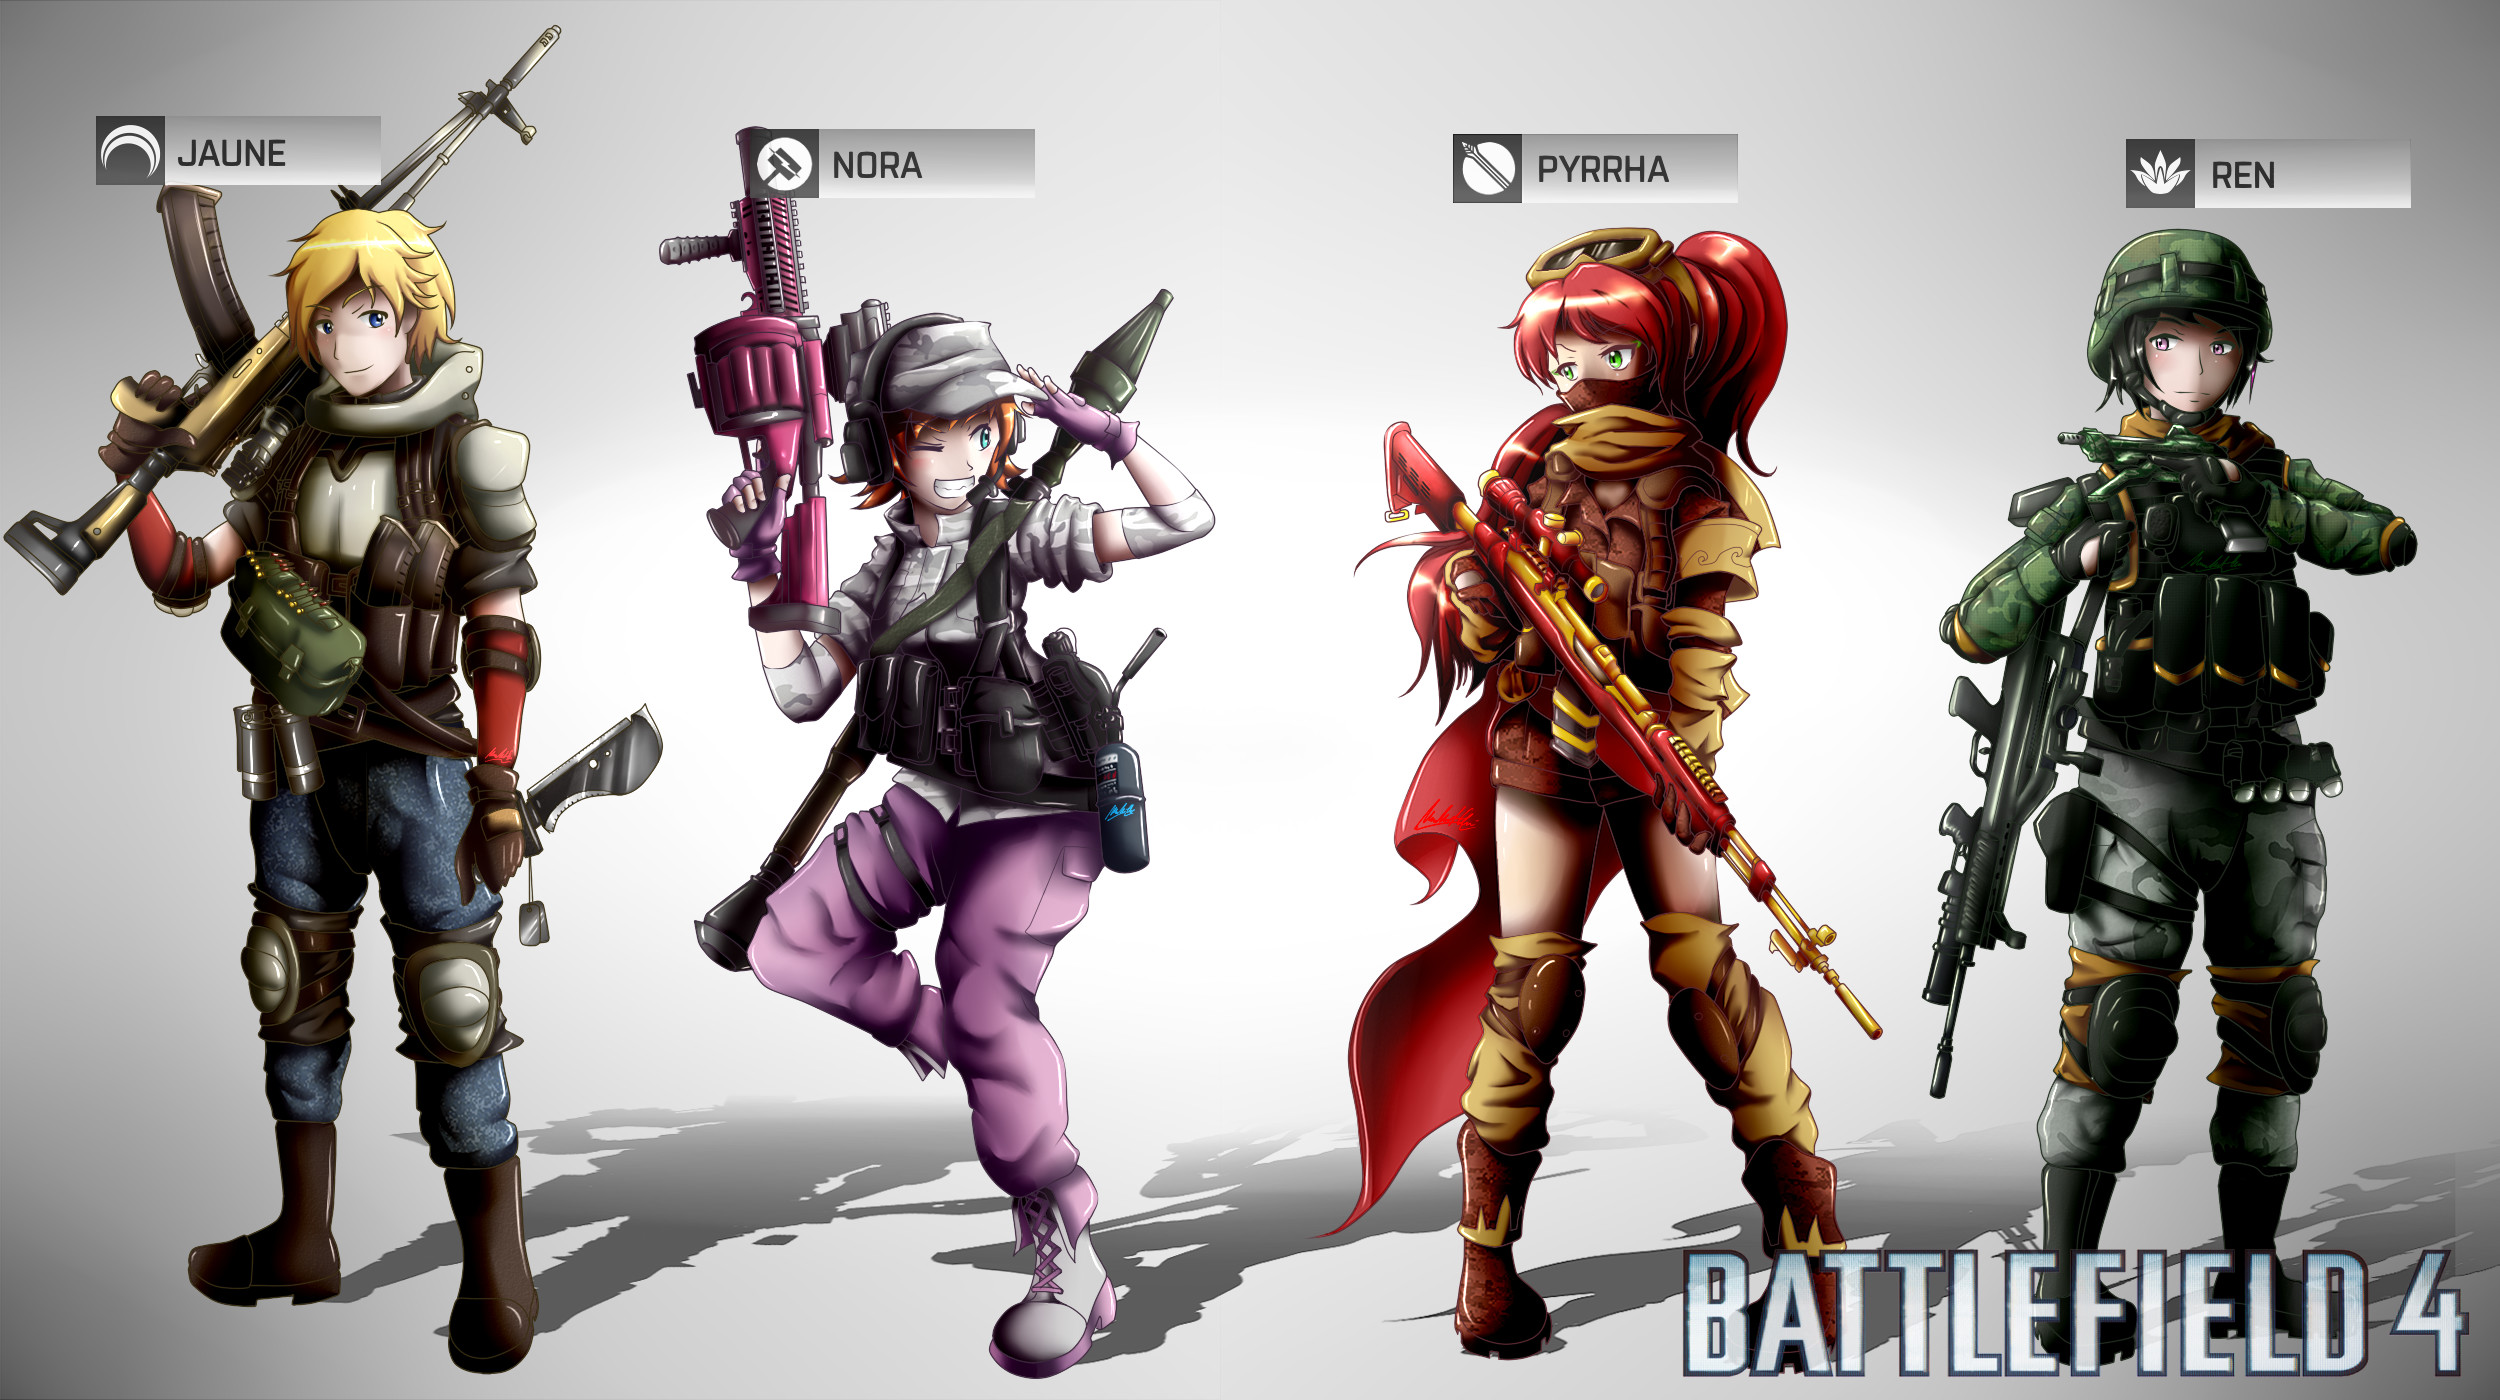 2500x1400 And RWBY BF4 wallpapers.... not kidding.